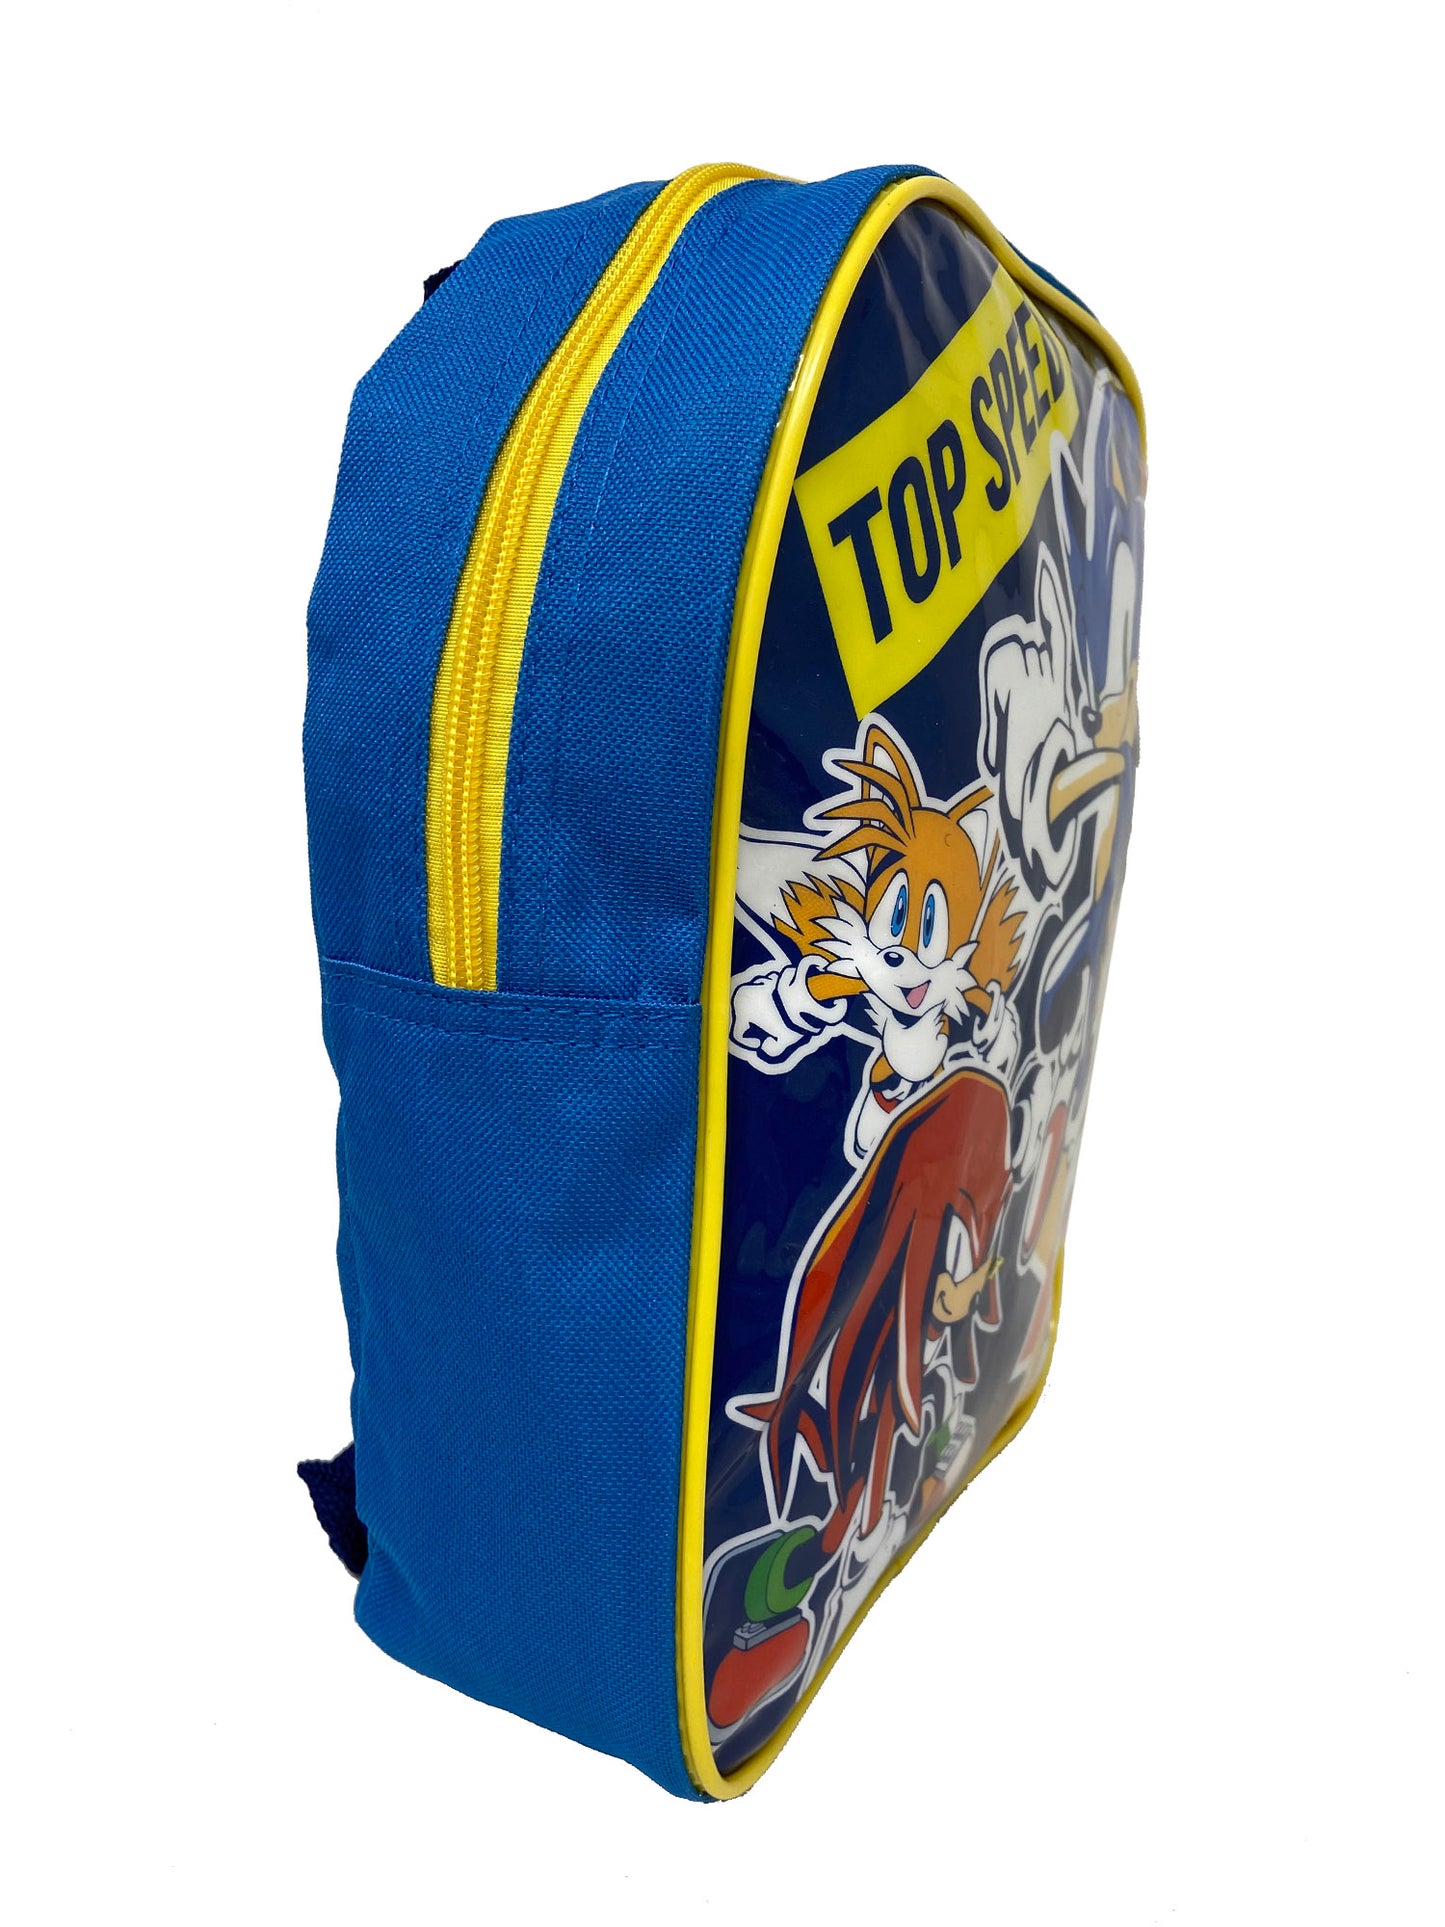 Sonic The Hedgehog Mini 11" Backpack Top Speed Tails & Sliding Pencil Case Set